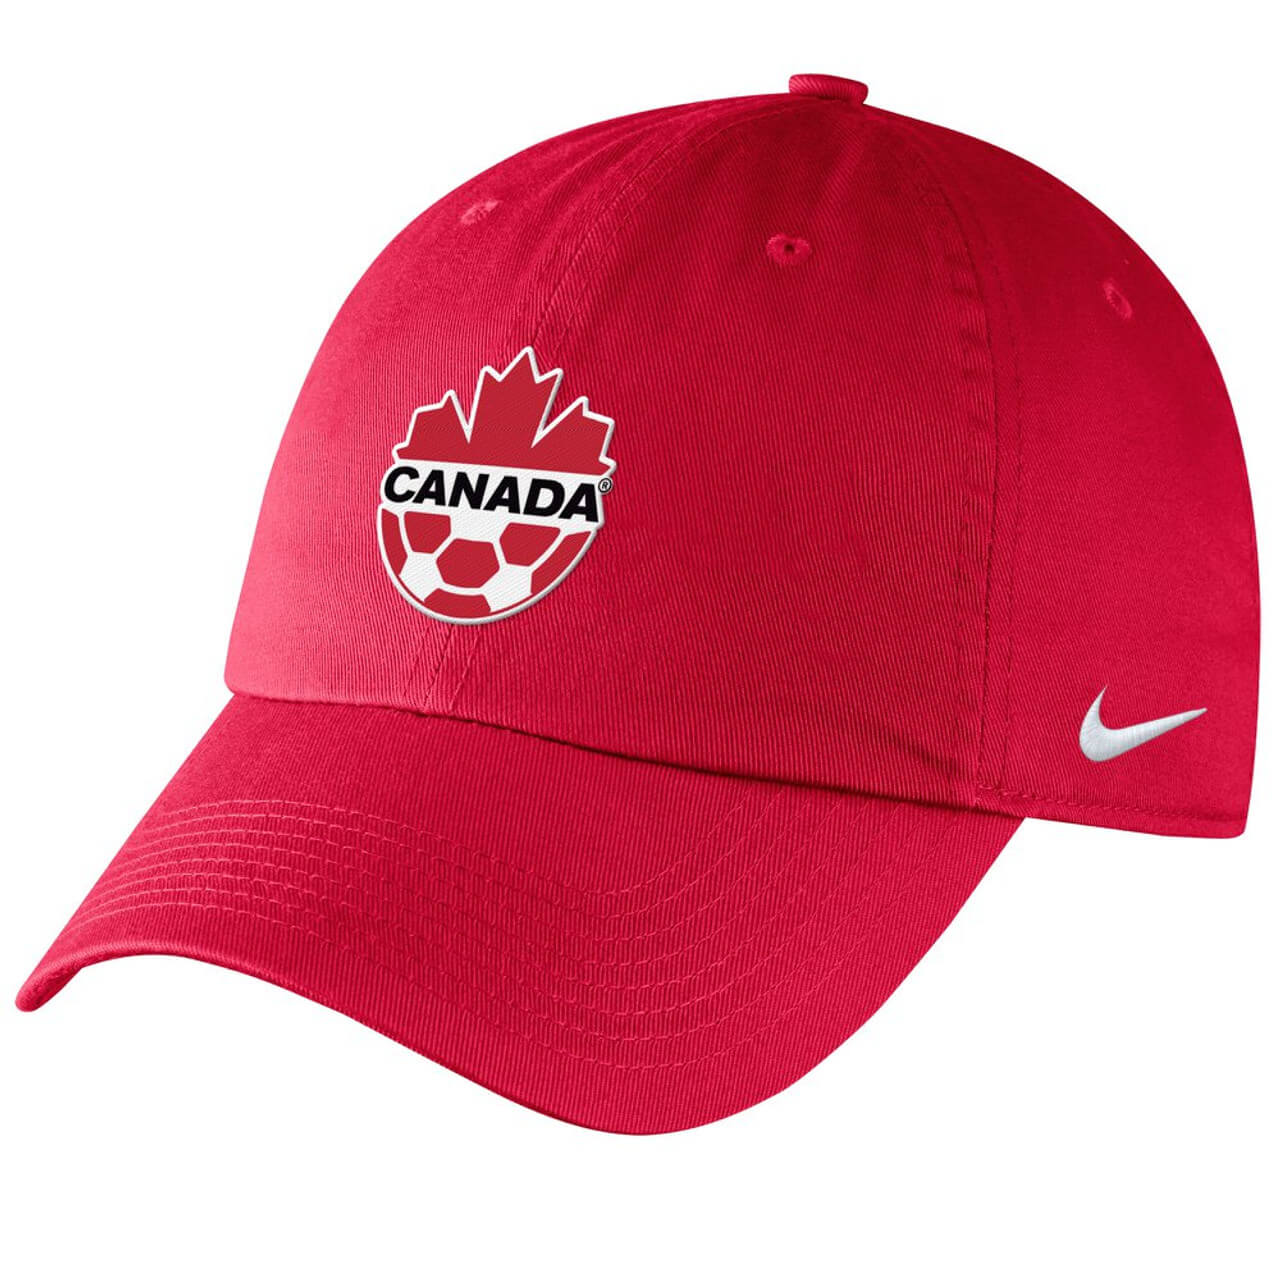 Nike Canada Soccer Campus Adjustable Cap Red (Front)